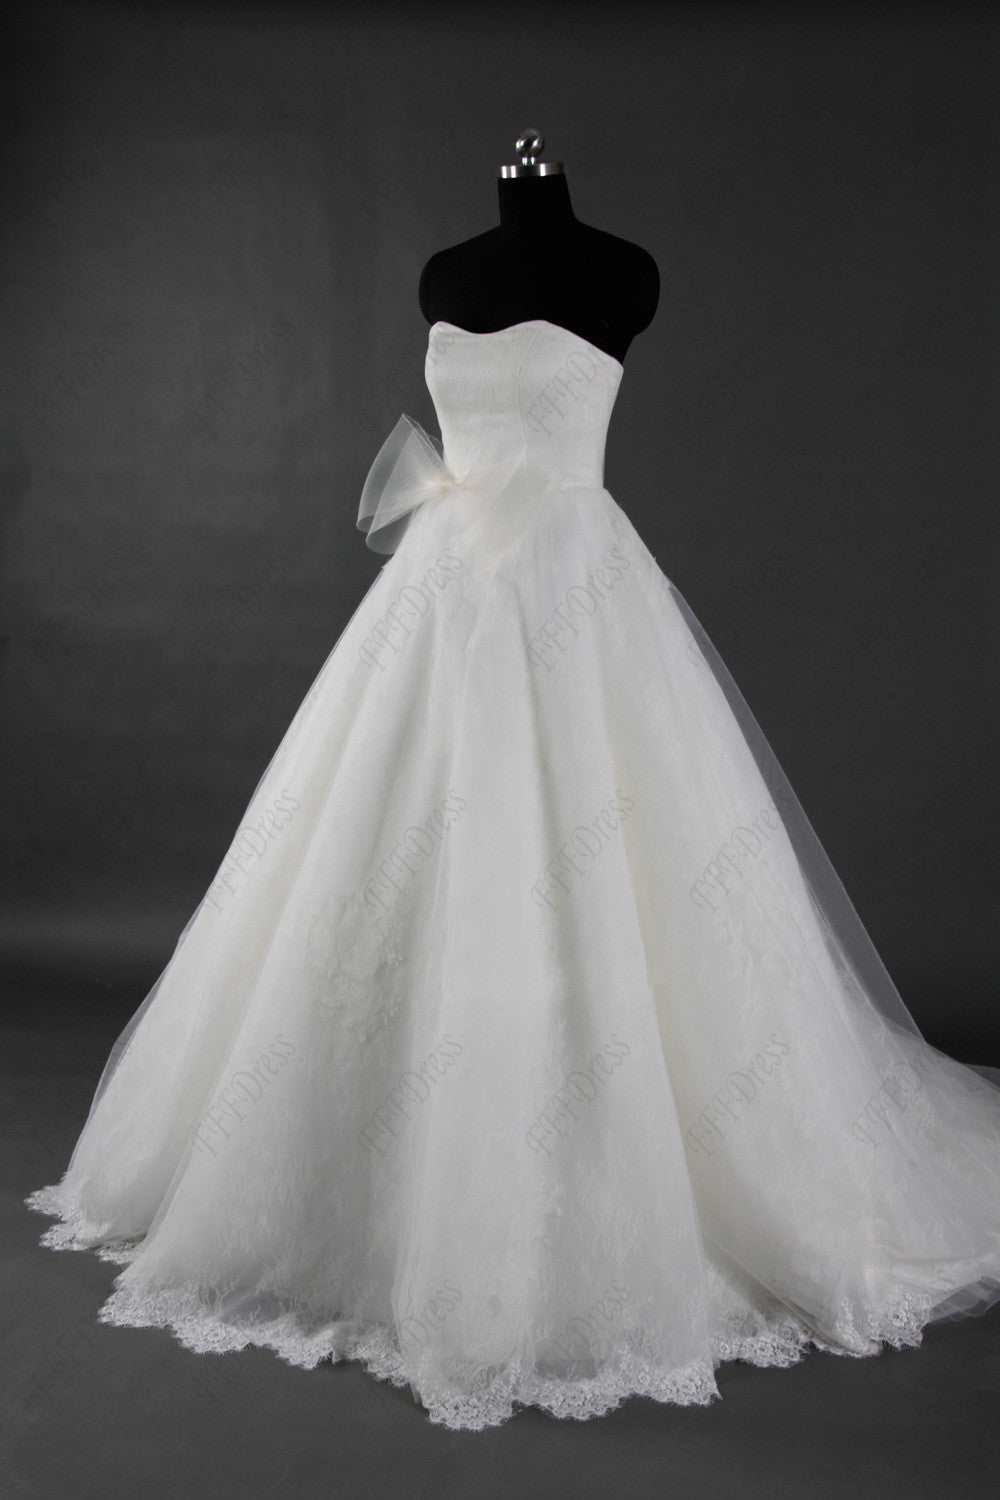 Lace sweetheart ball gown wedding dress with sash